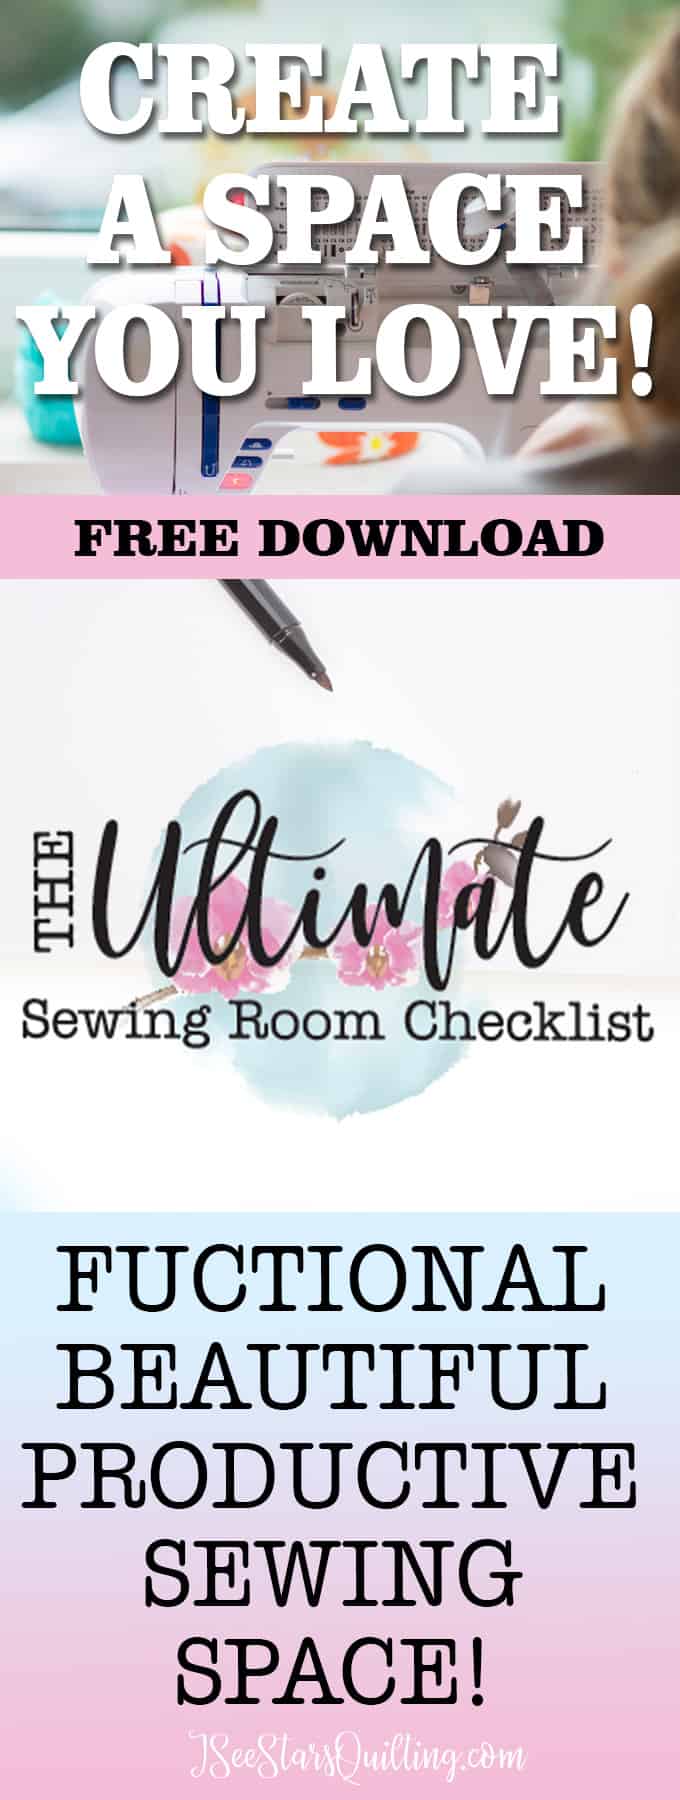 Here are tips to creating The Ultimate Sewing space (no matter what size!) PLUS a Free download checklist so you have everything you need!